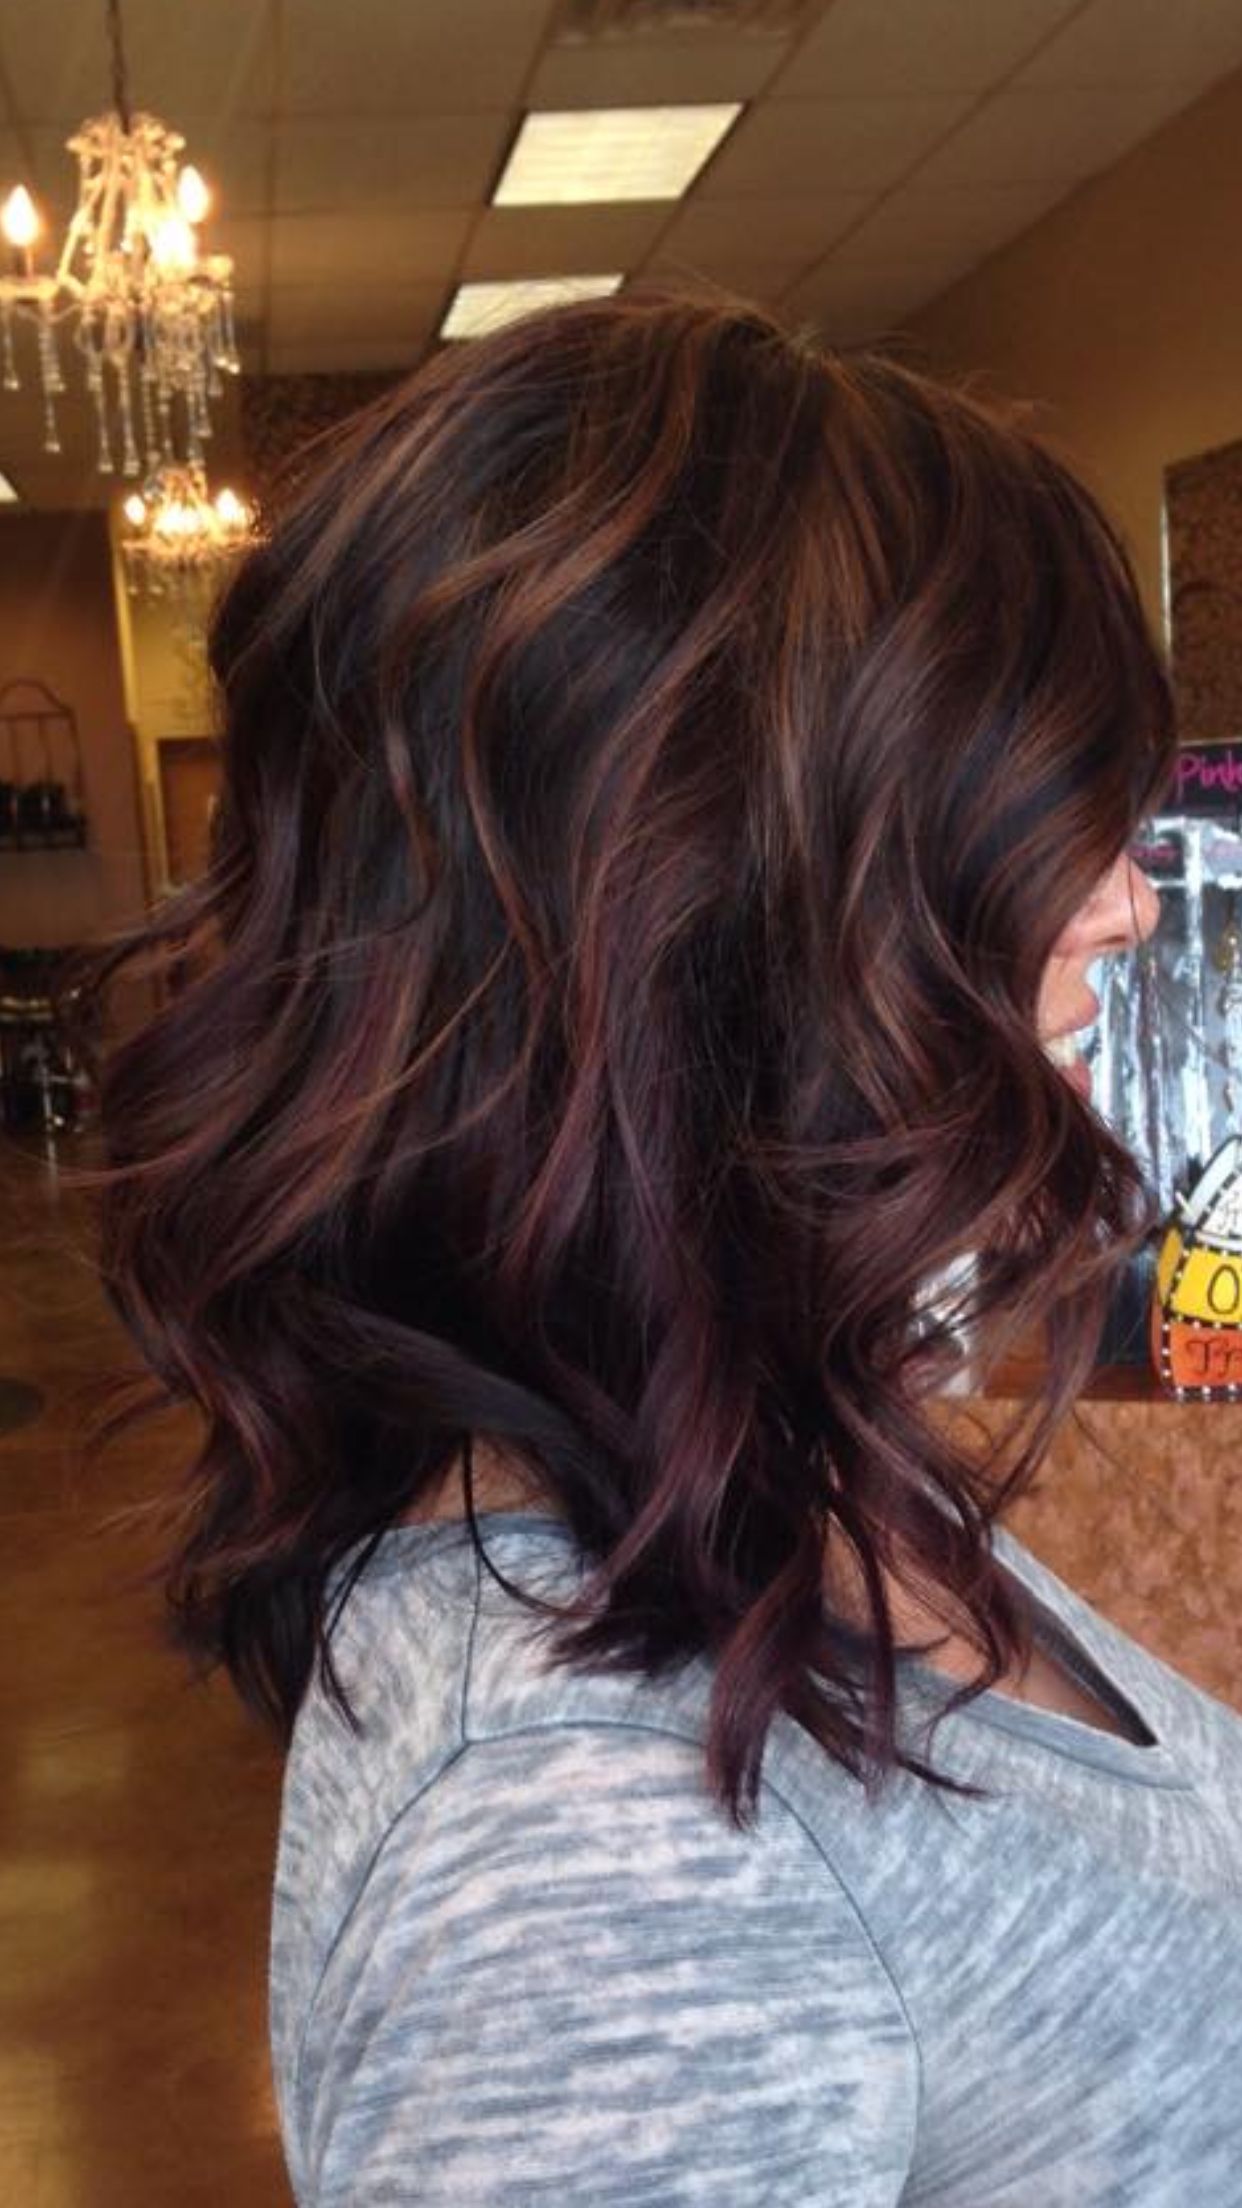 Fall Winter Hair Colors For Brunettes